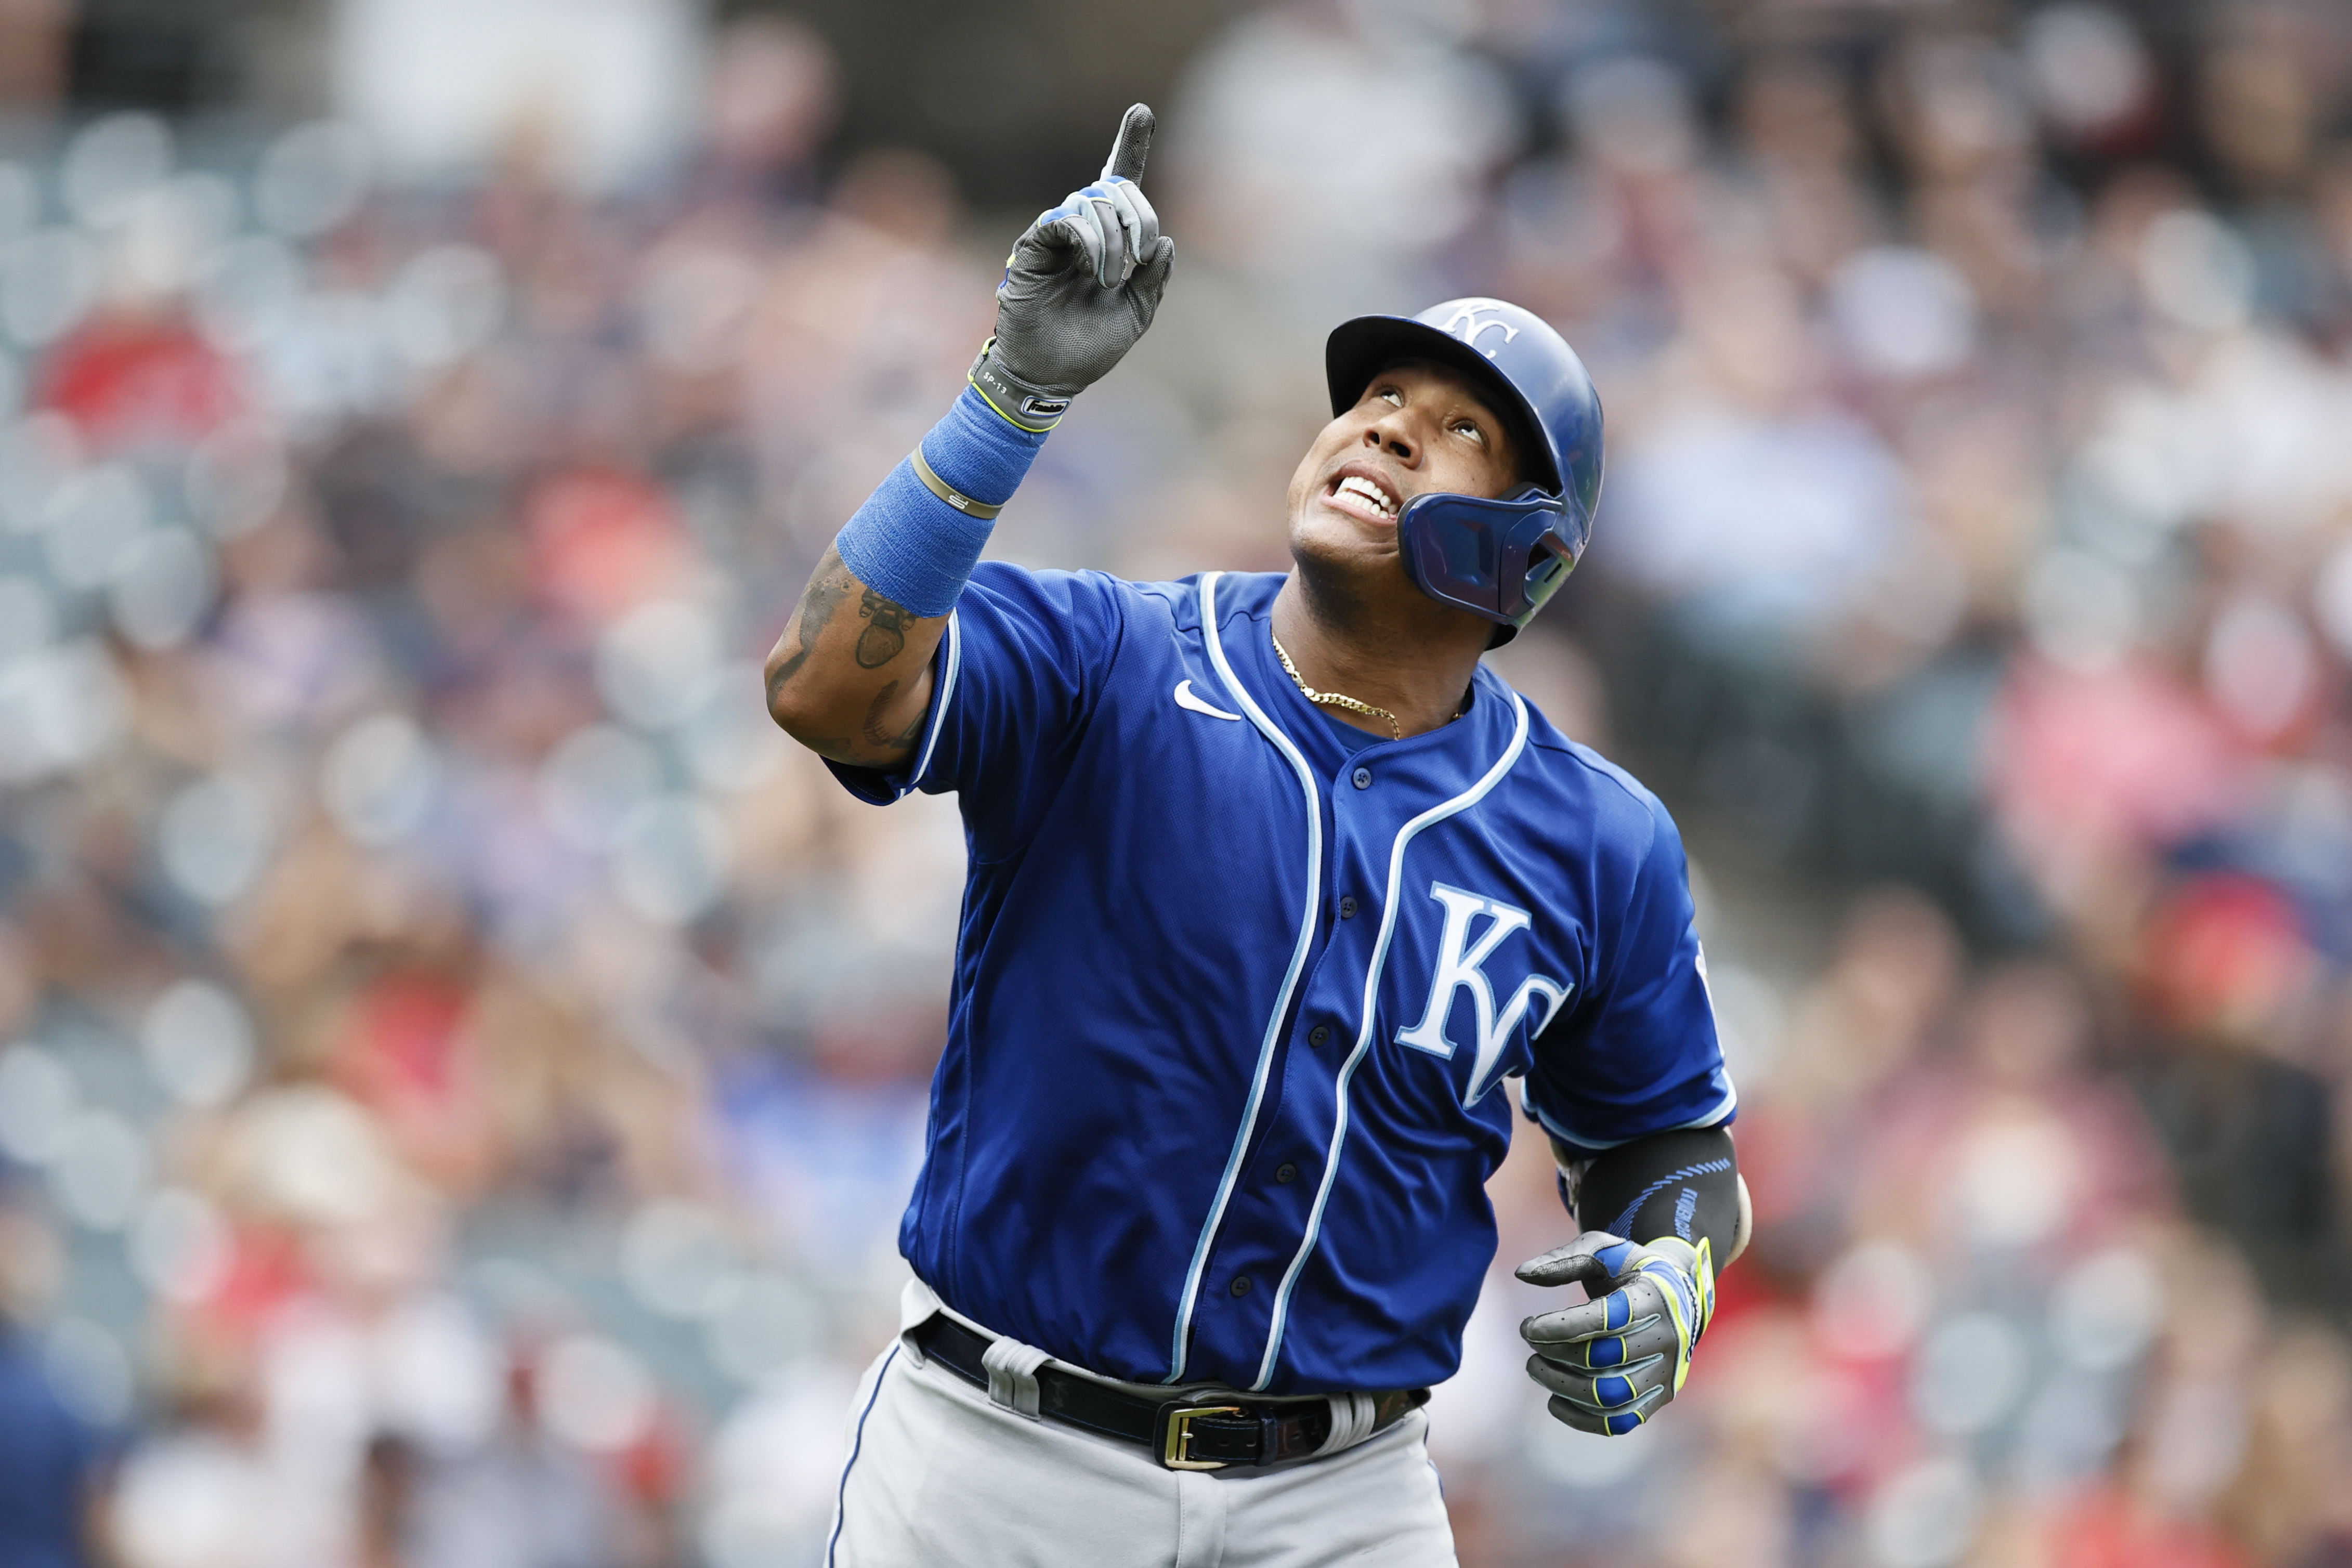 Salvador Perez hits his 200th homer as a catcher as the Royals